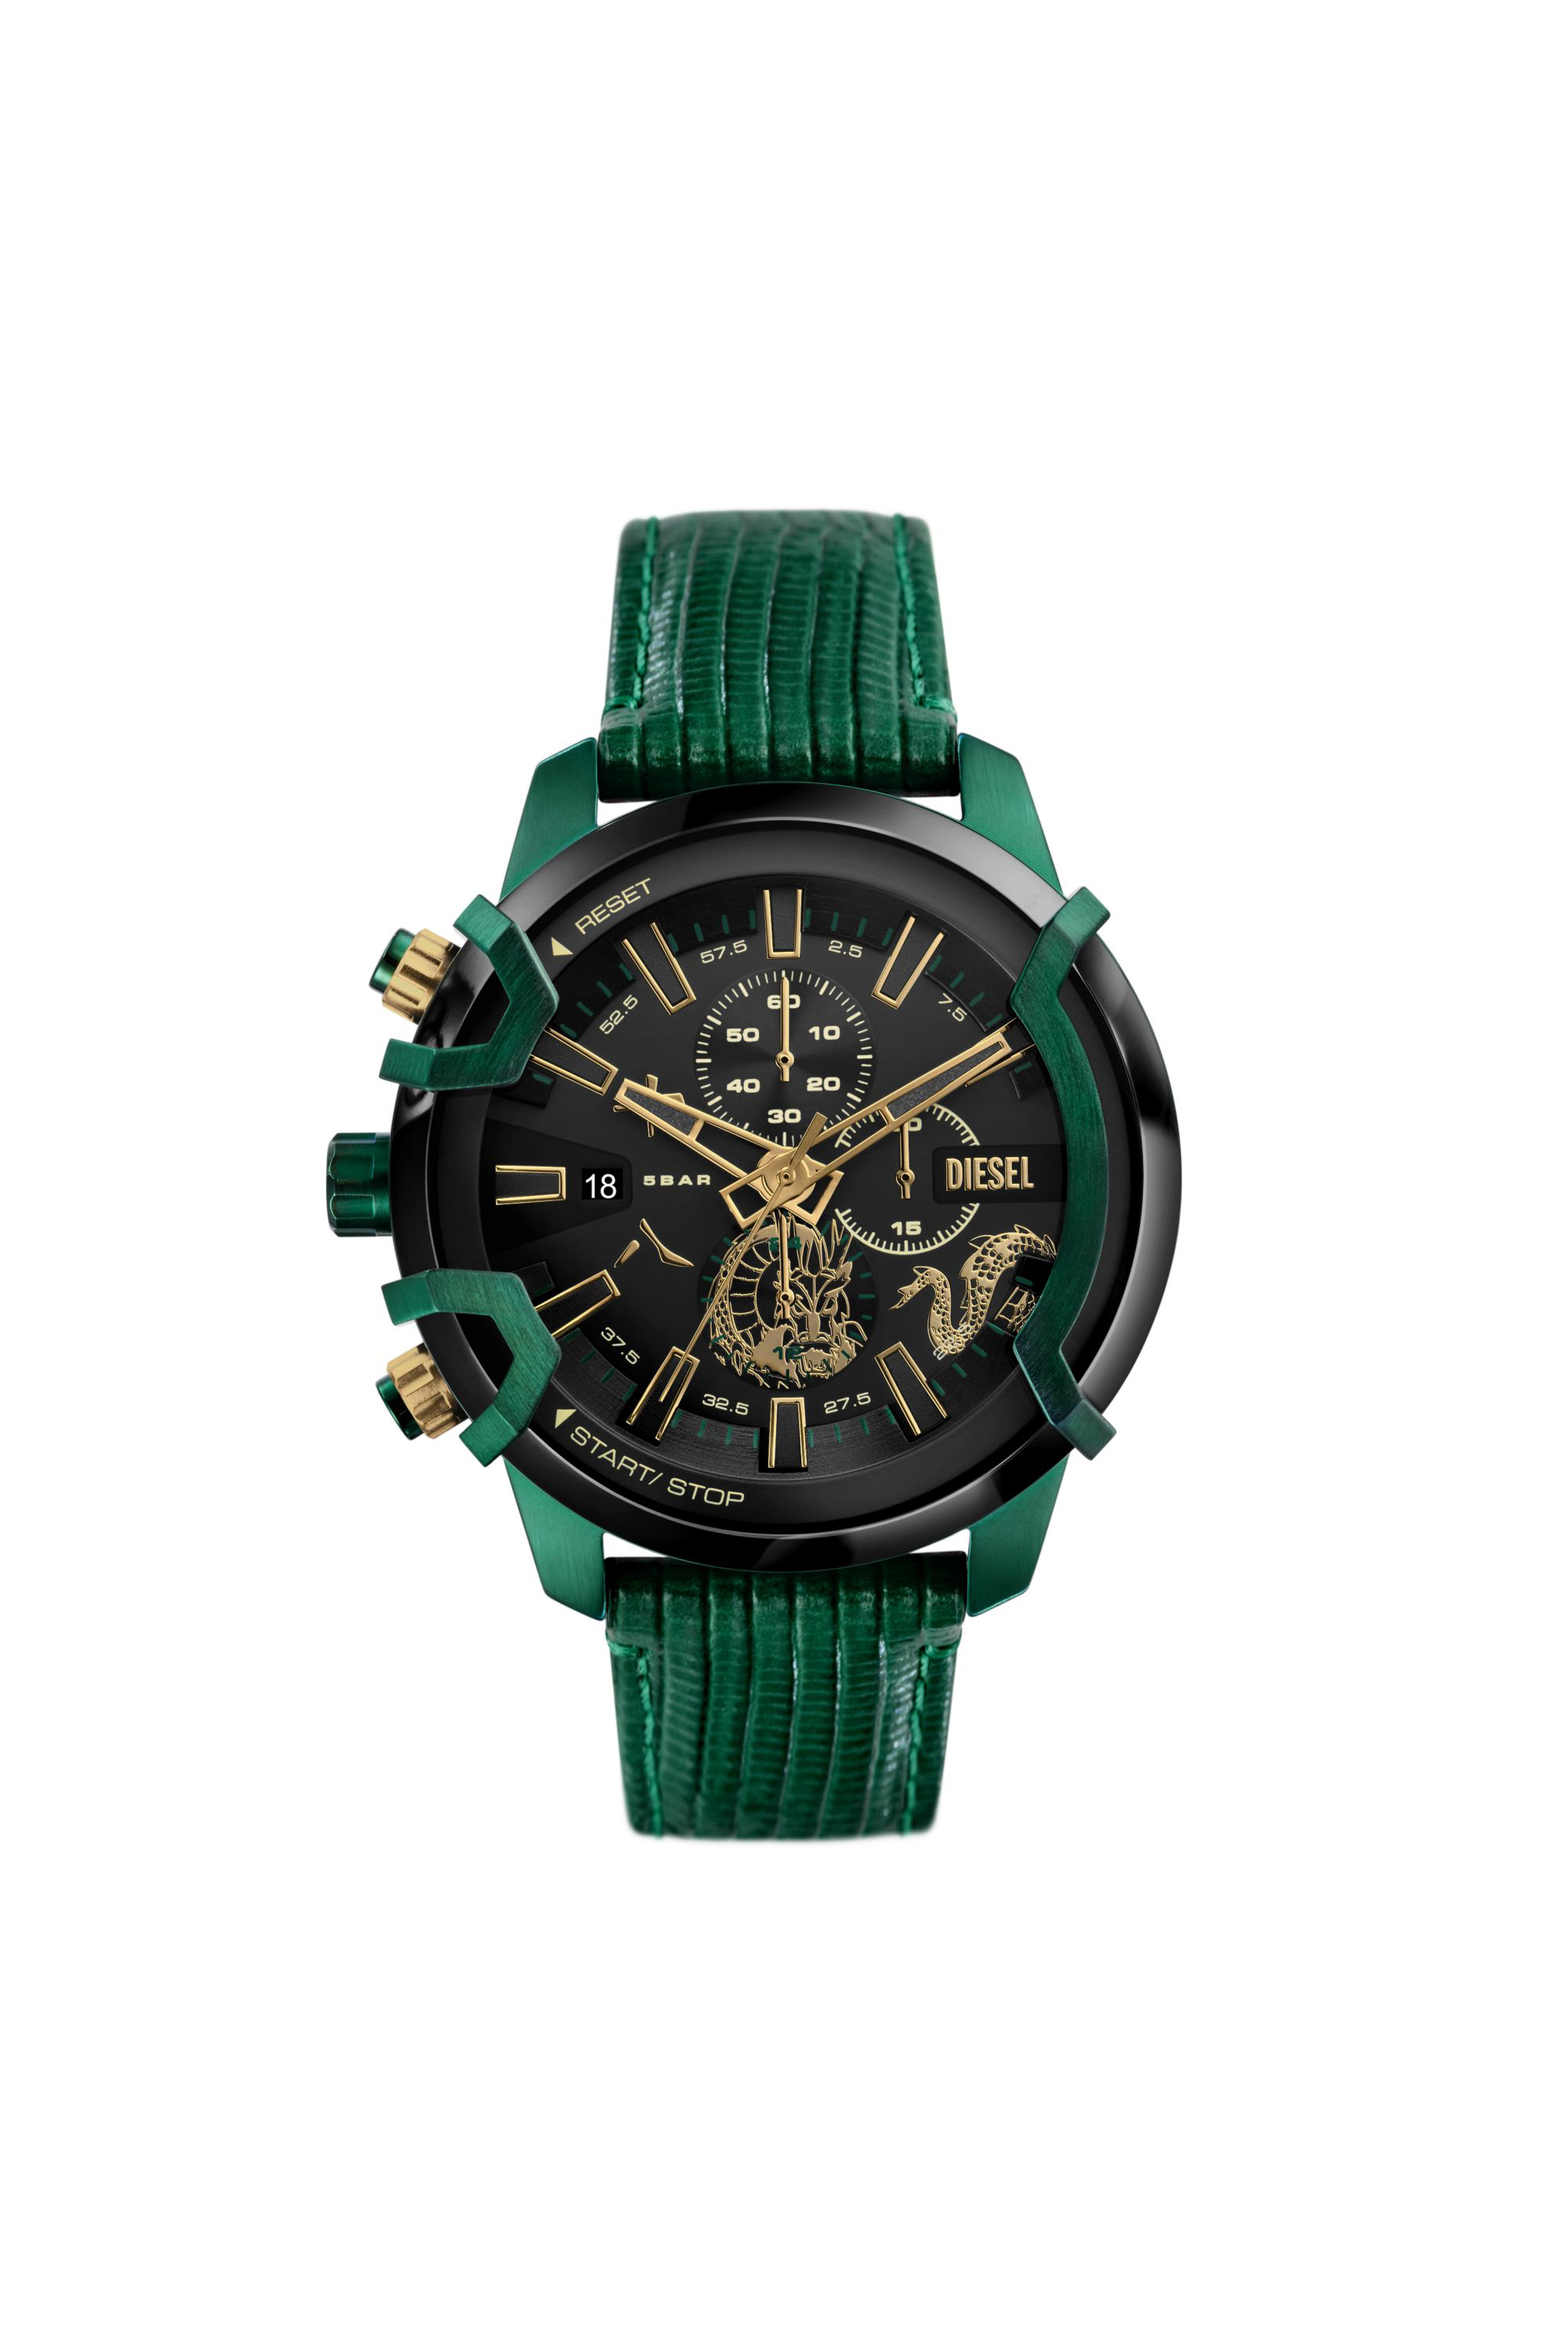 Diesel Men's Griffed Chronograph Green Leather Watch 48mm